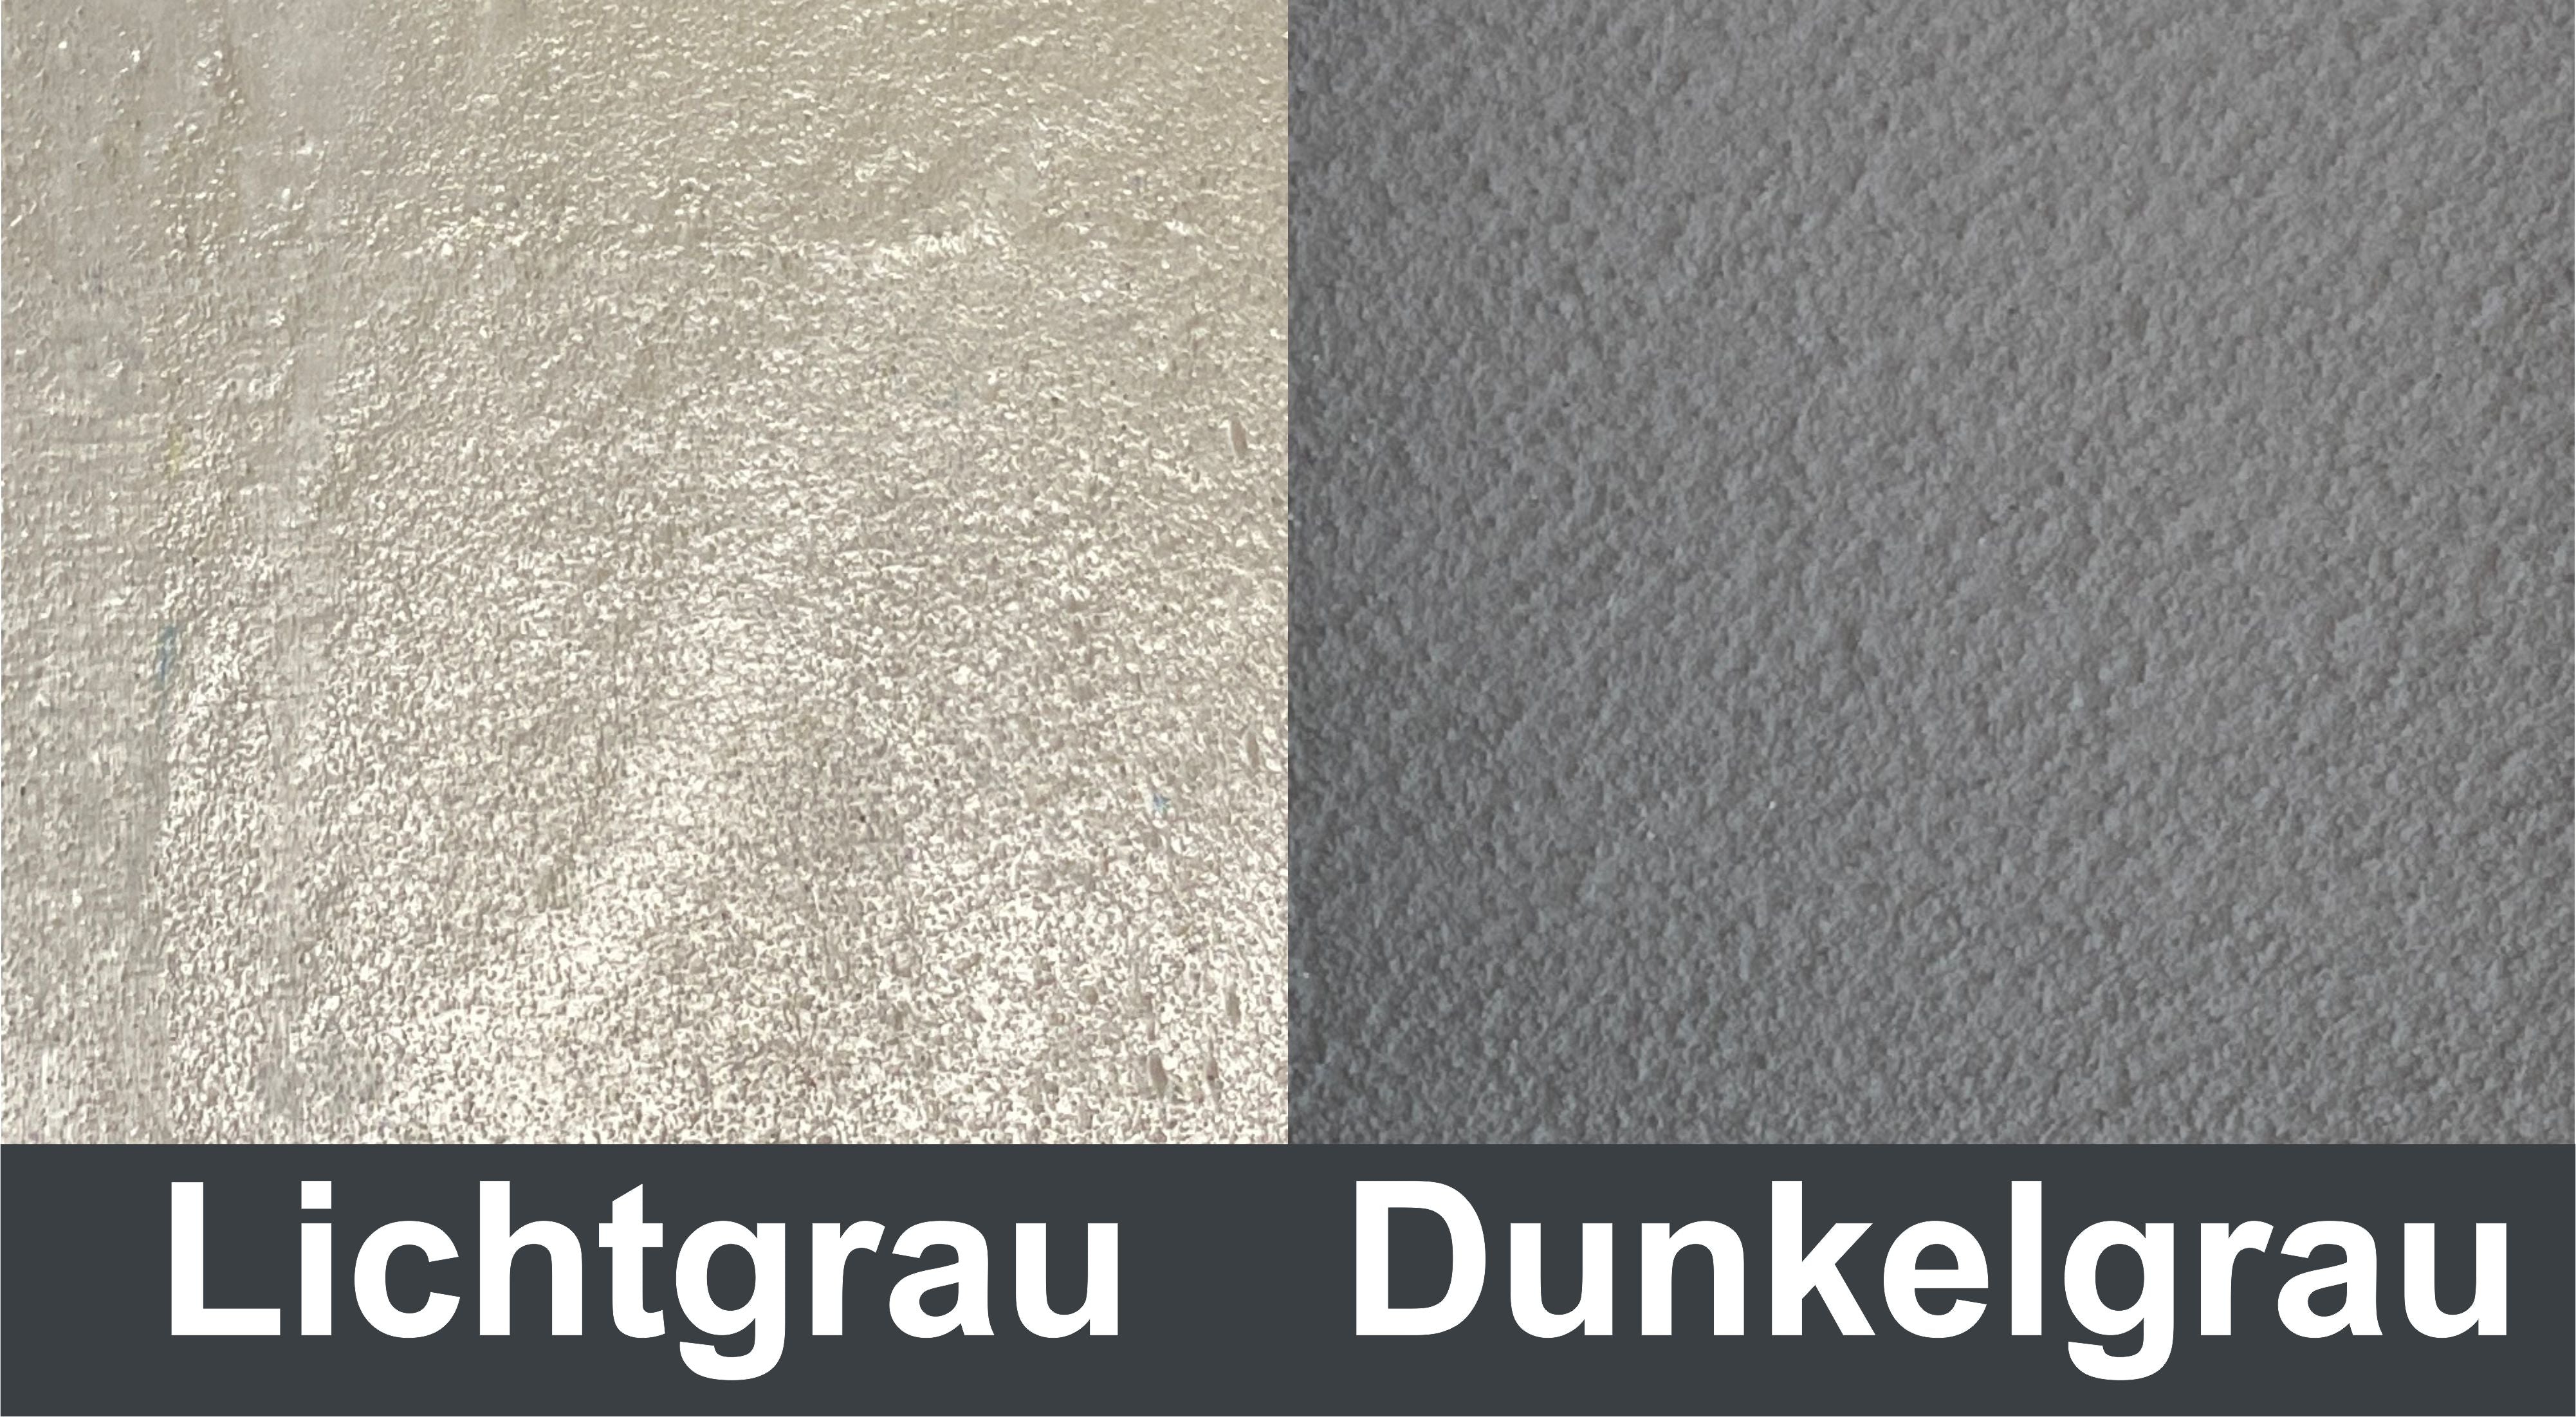 Floor leveling compound Smooth Level surface Preparation Coverings Cementitious mixture Mortar Grout W715 - 25Kg 